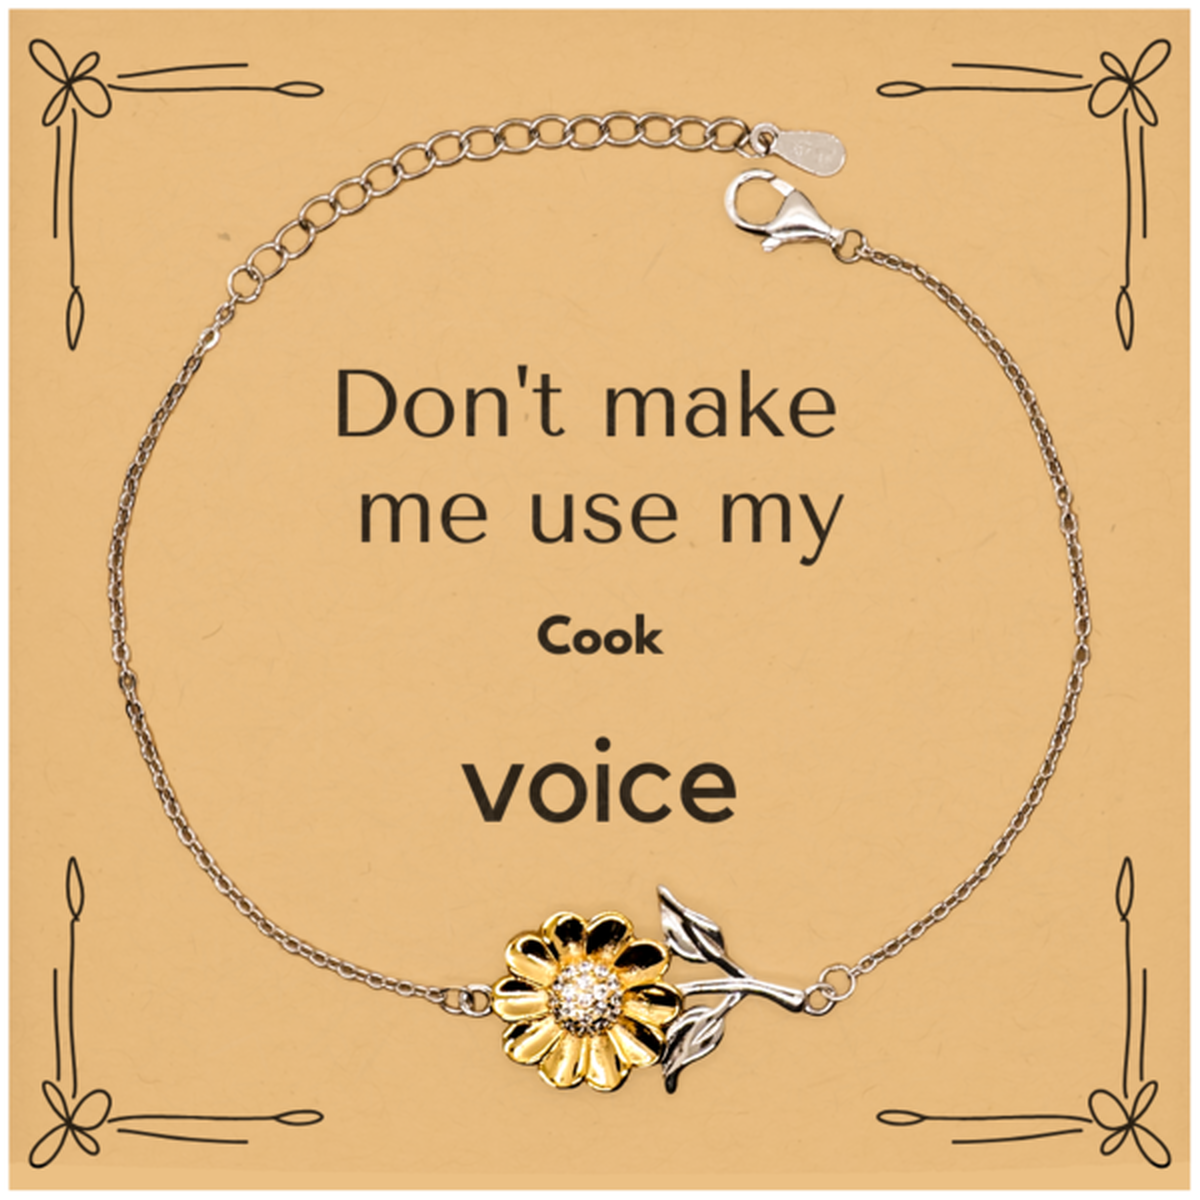 Don't make me use my Cook voice, Sarcasm Cook Card Gifts, Christmas Cook Sunflower Bracelet Birthday Unique Gifts For Cook Coworkers, Men, Women, Colleague, Friends